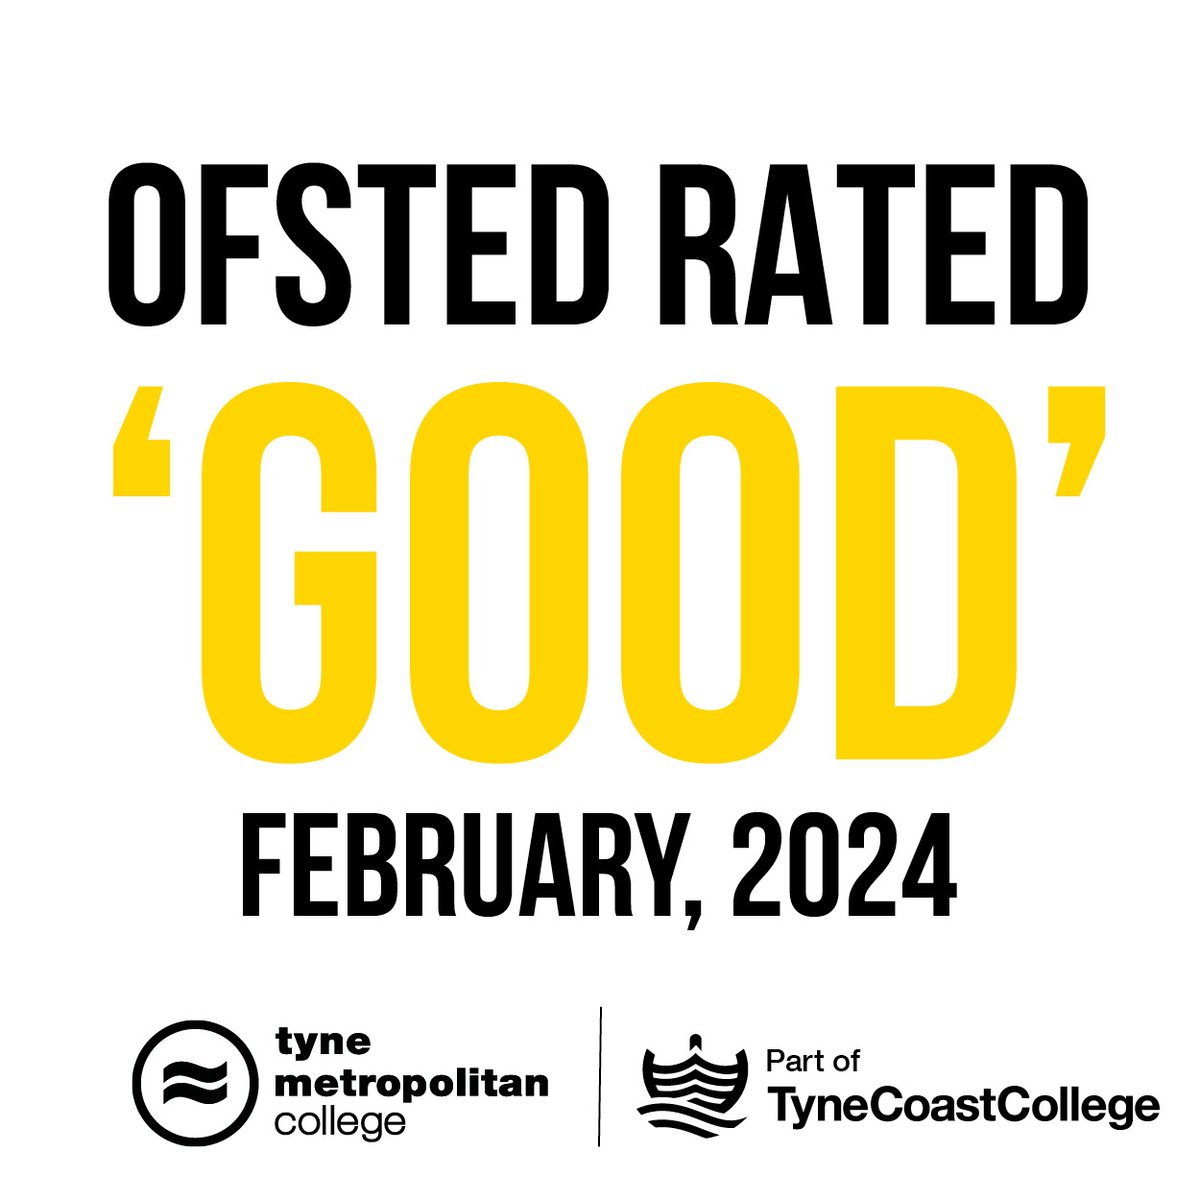 GOOD NEWS! 🎉 Our Ofsted report is now live and we are officially 'GOOD' in ALL areas! Check out the full report here: files.ofsted.gov.uk/v1/file/502423…